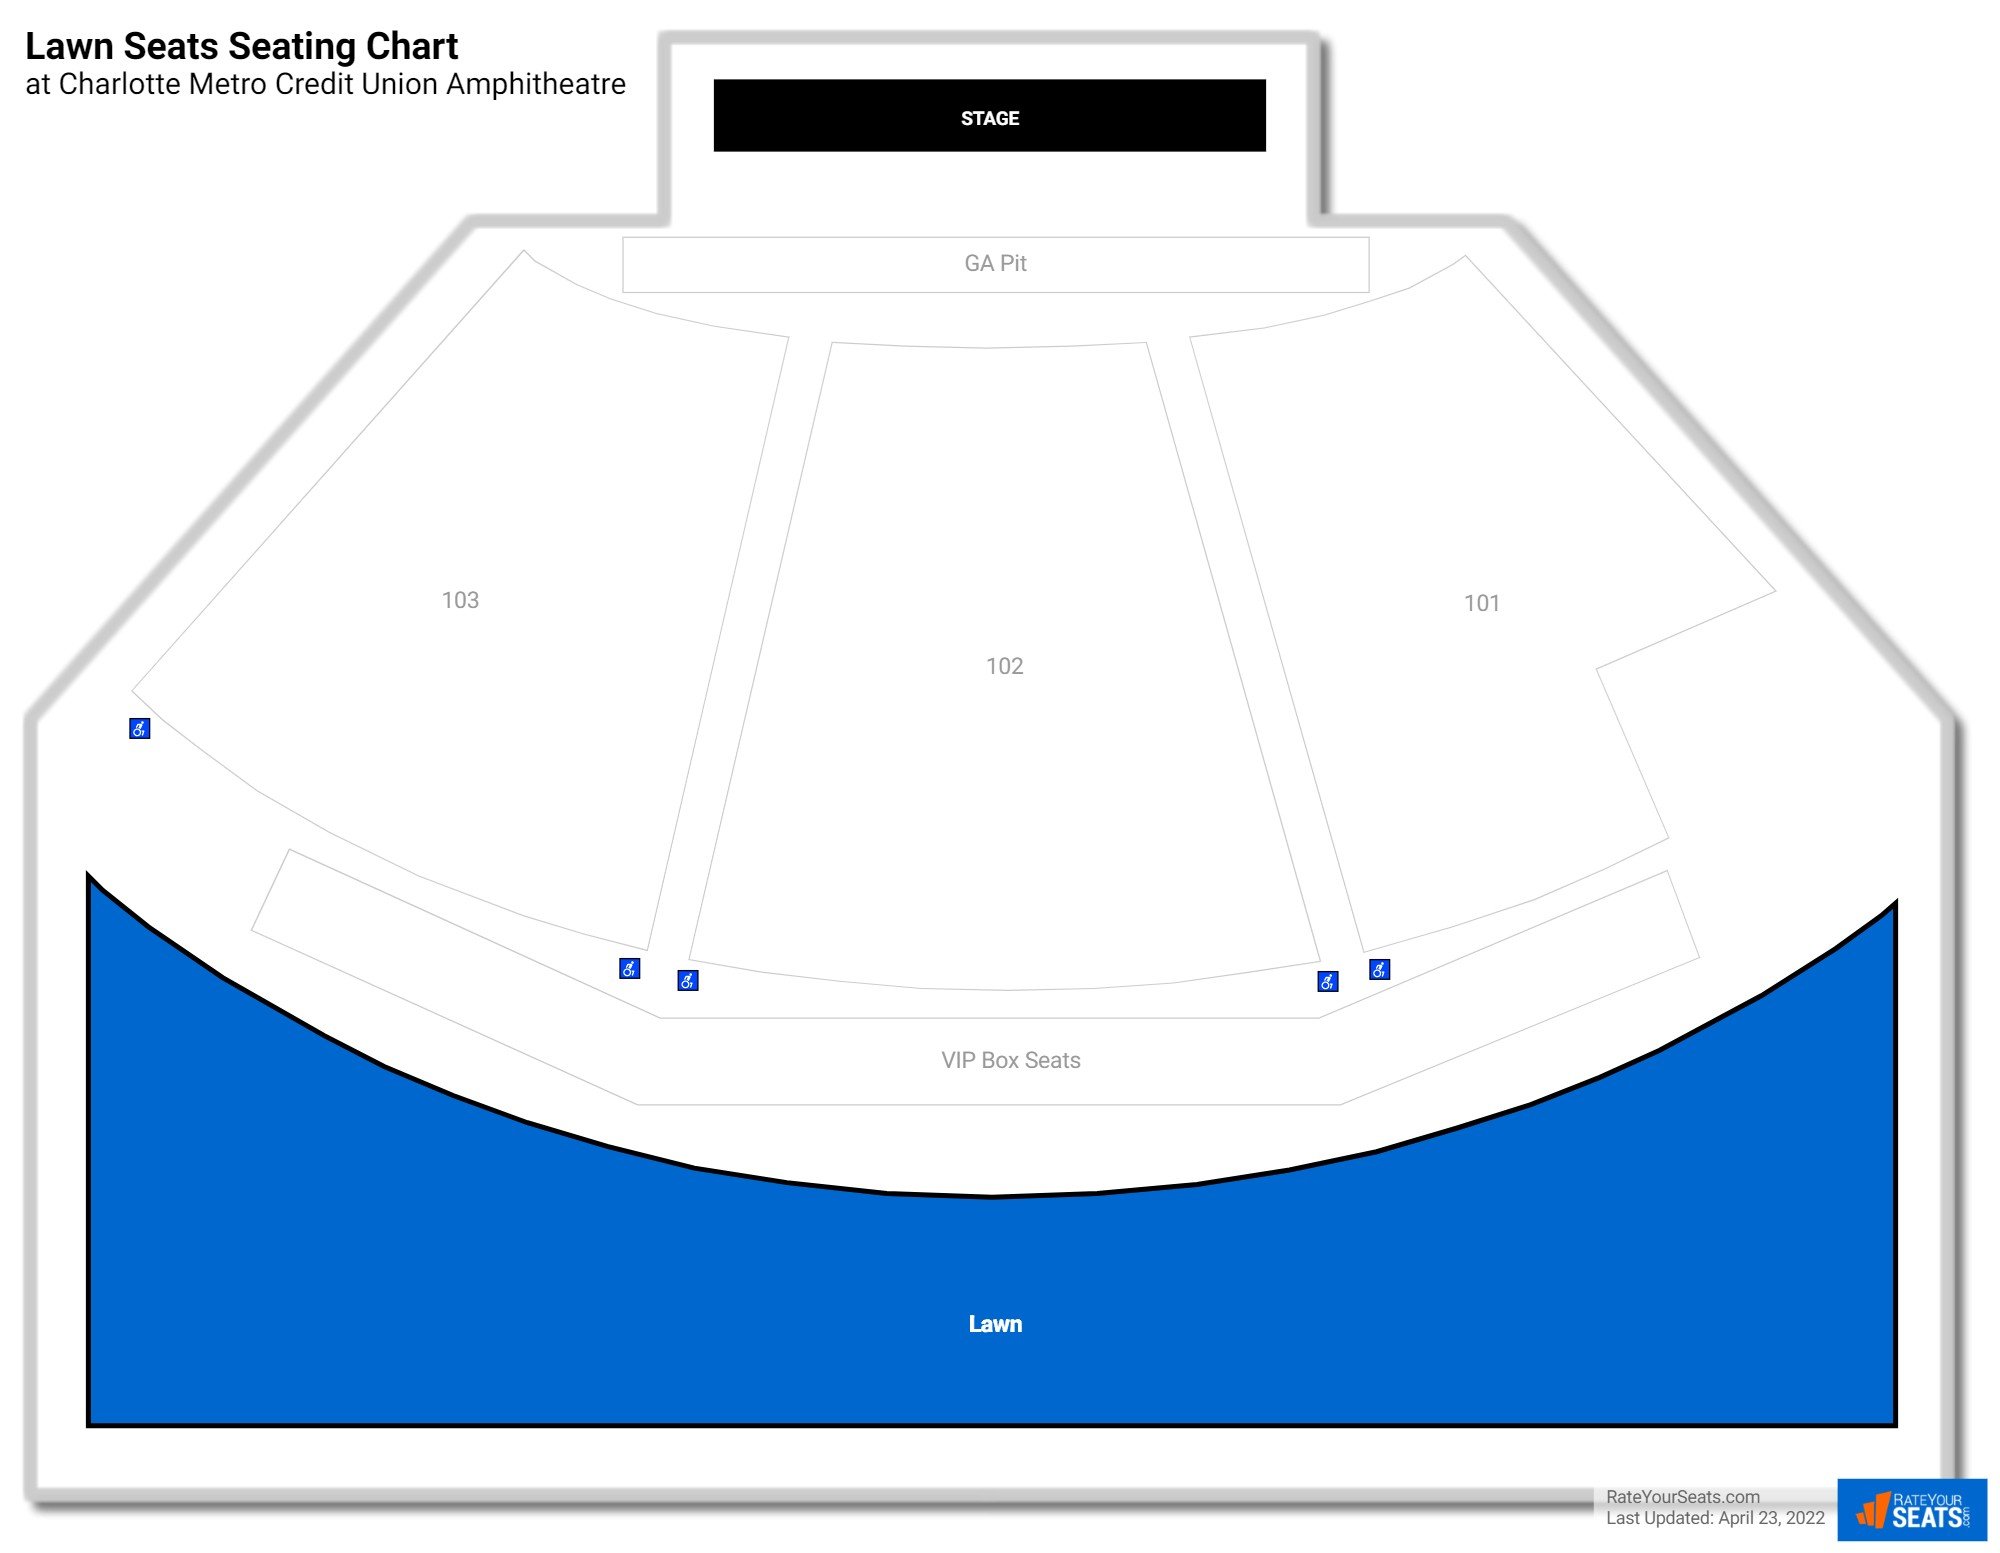 Concert Lawn Seats Seating Chart at Charlotte Metro Credit Union Amphitheatre